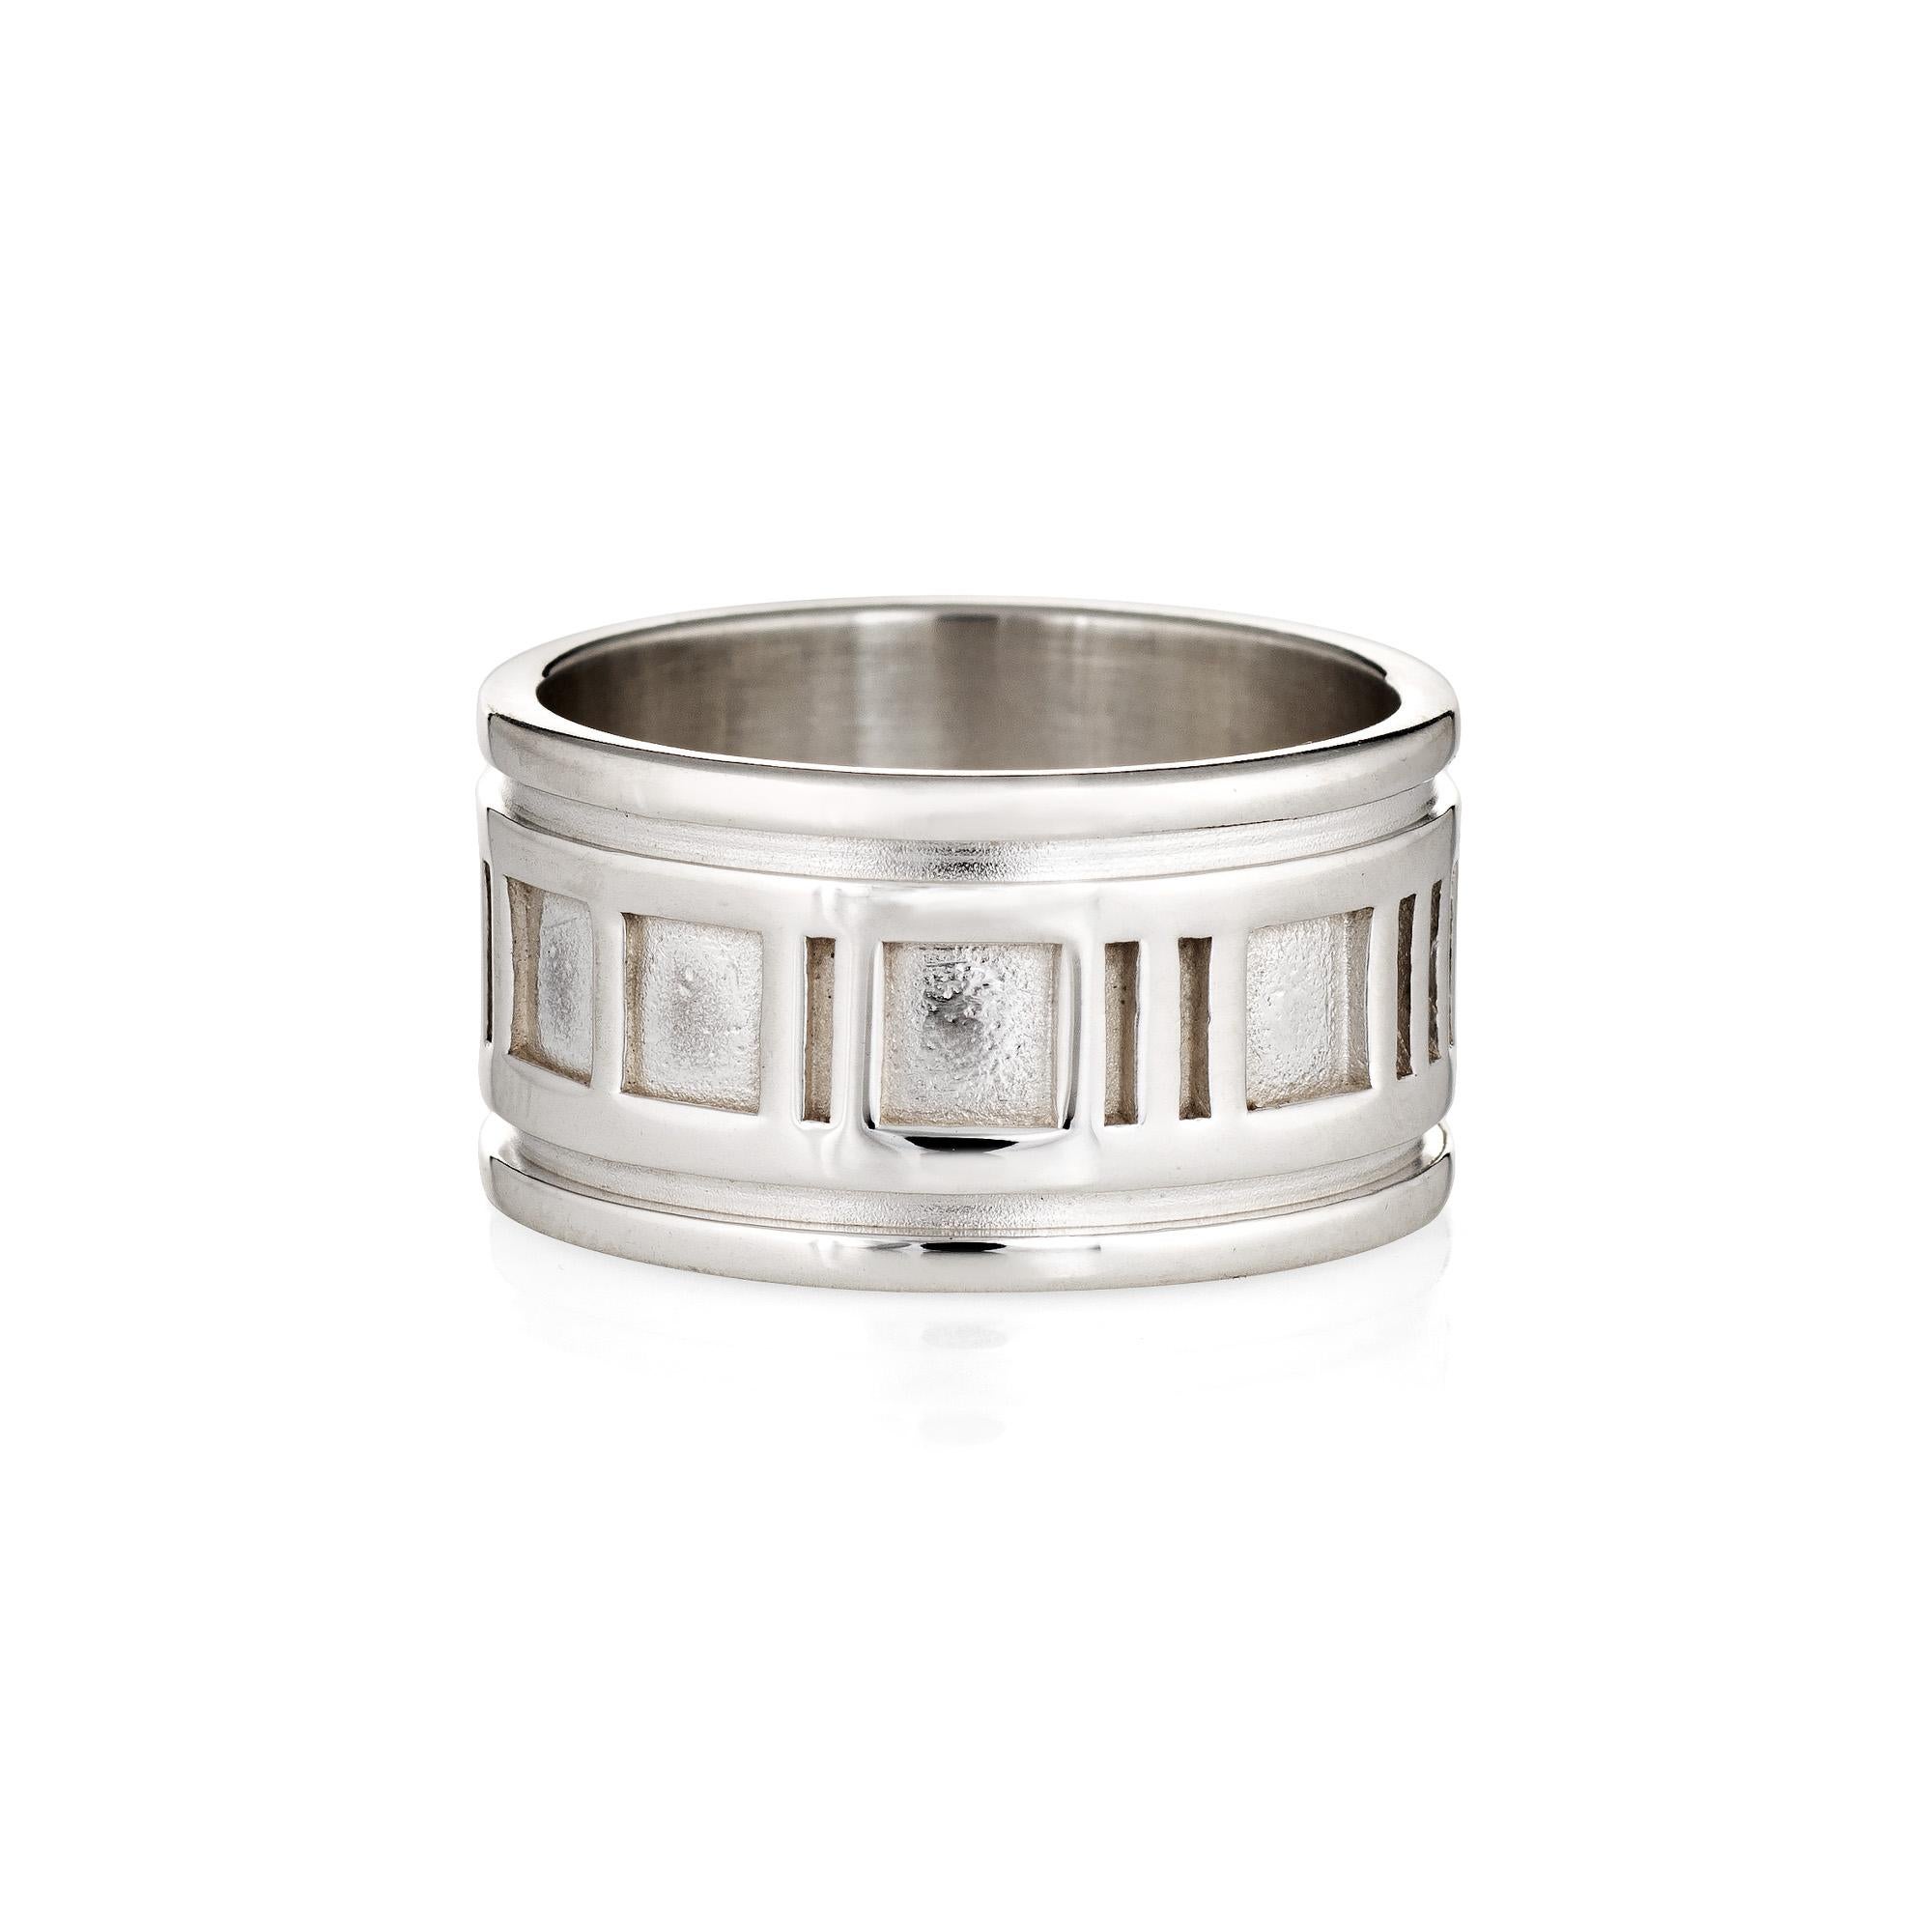 Finely detailed pre-owned Tiffany & Co Atlas ring crafted in sterling silver (circa 1995). 

The stylish ring features Roman Numerals around the entire band. The low rise ring (1.5mm - 0.05 inches) sits comfortably on the finger.  

The ring is in